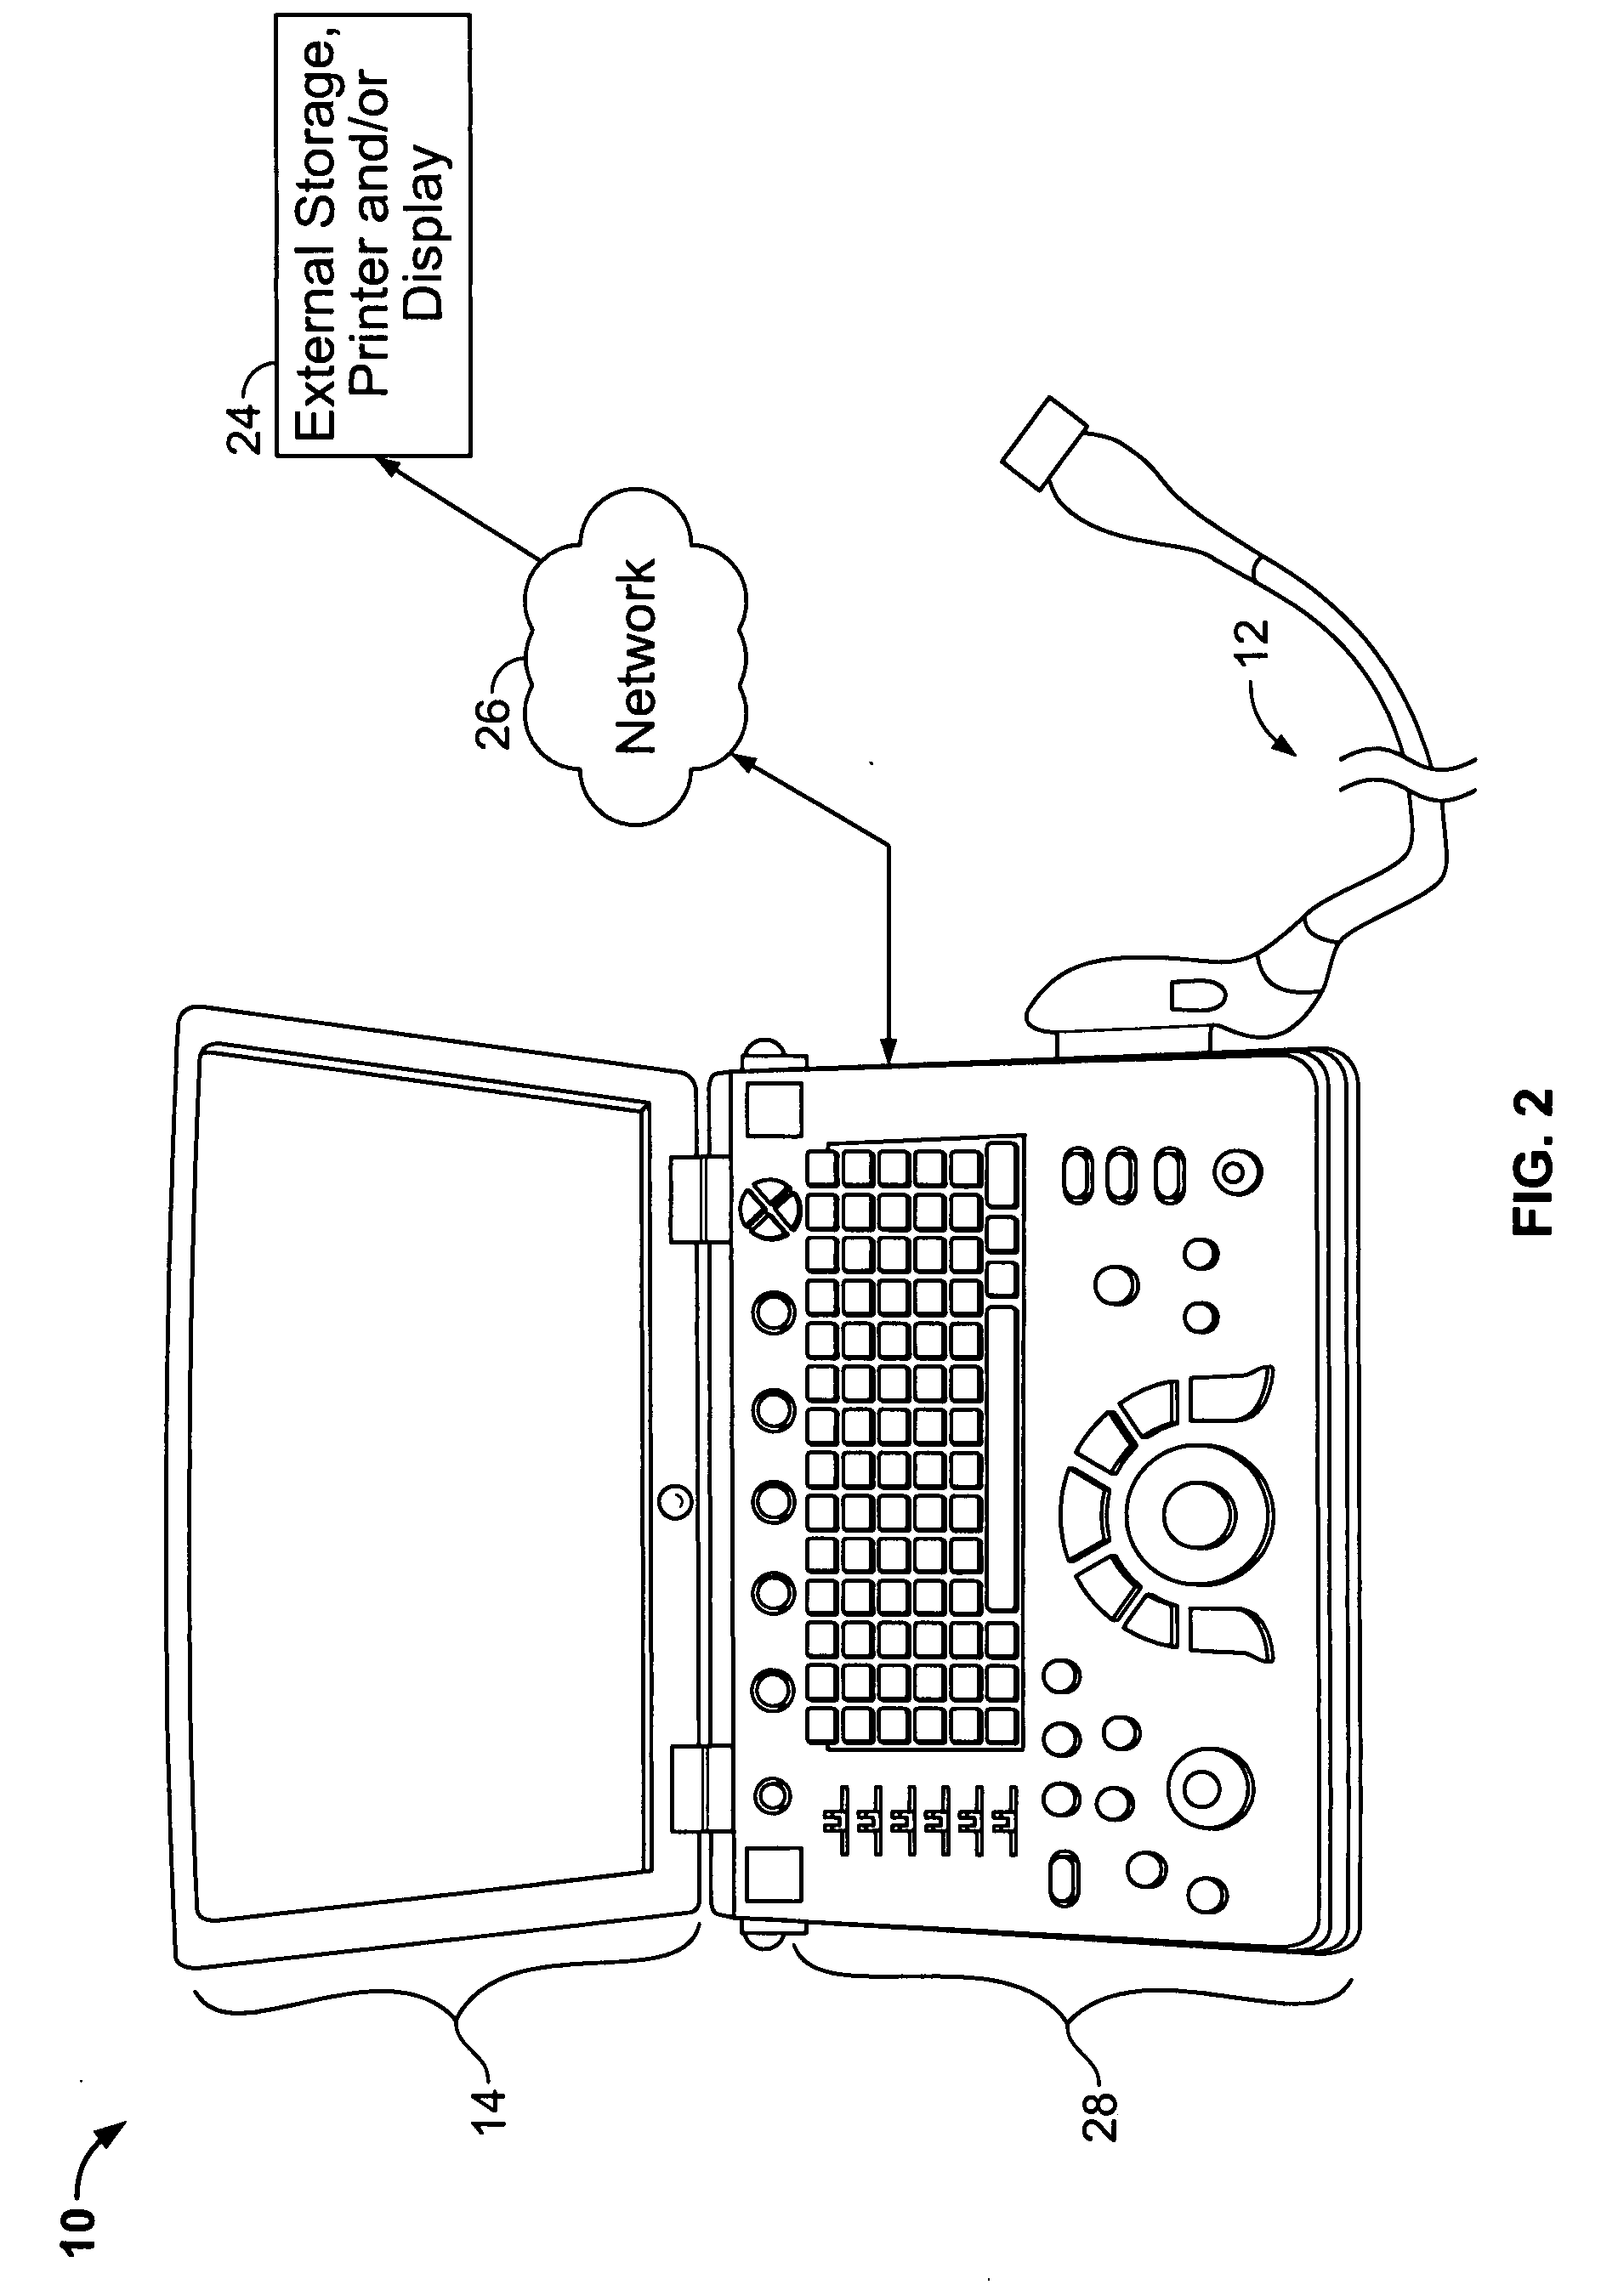 System and method for tissue characterization using ultrasound imaging